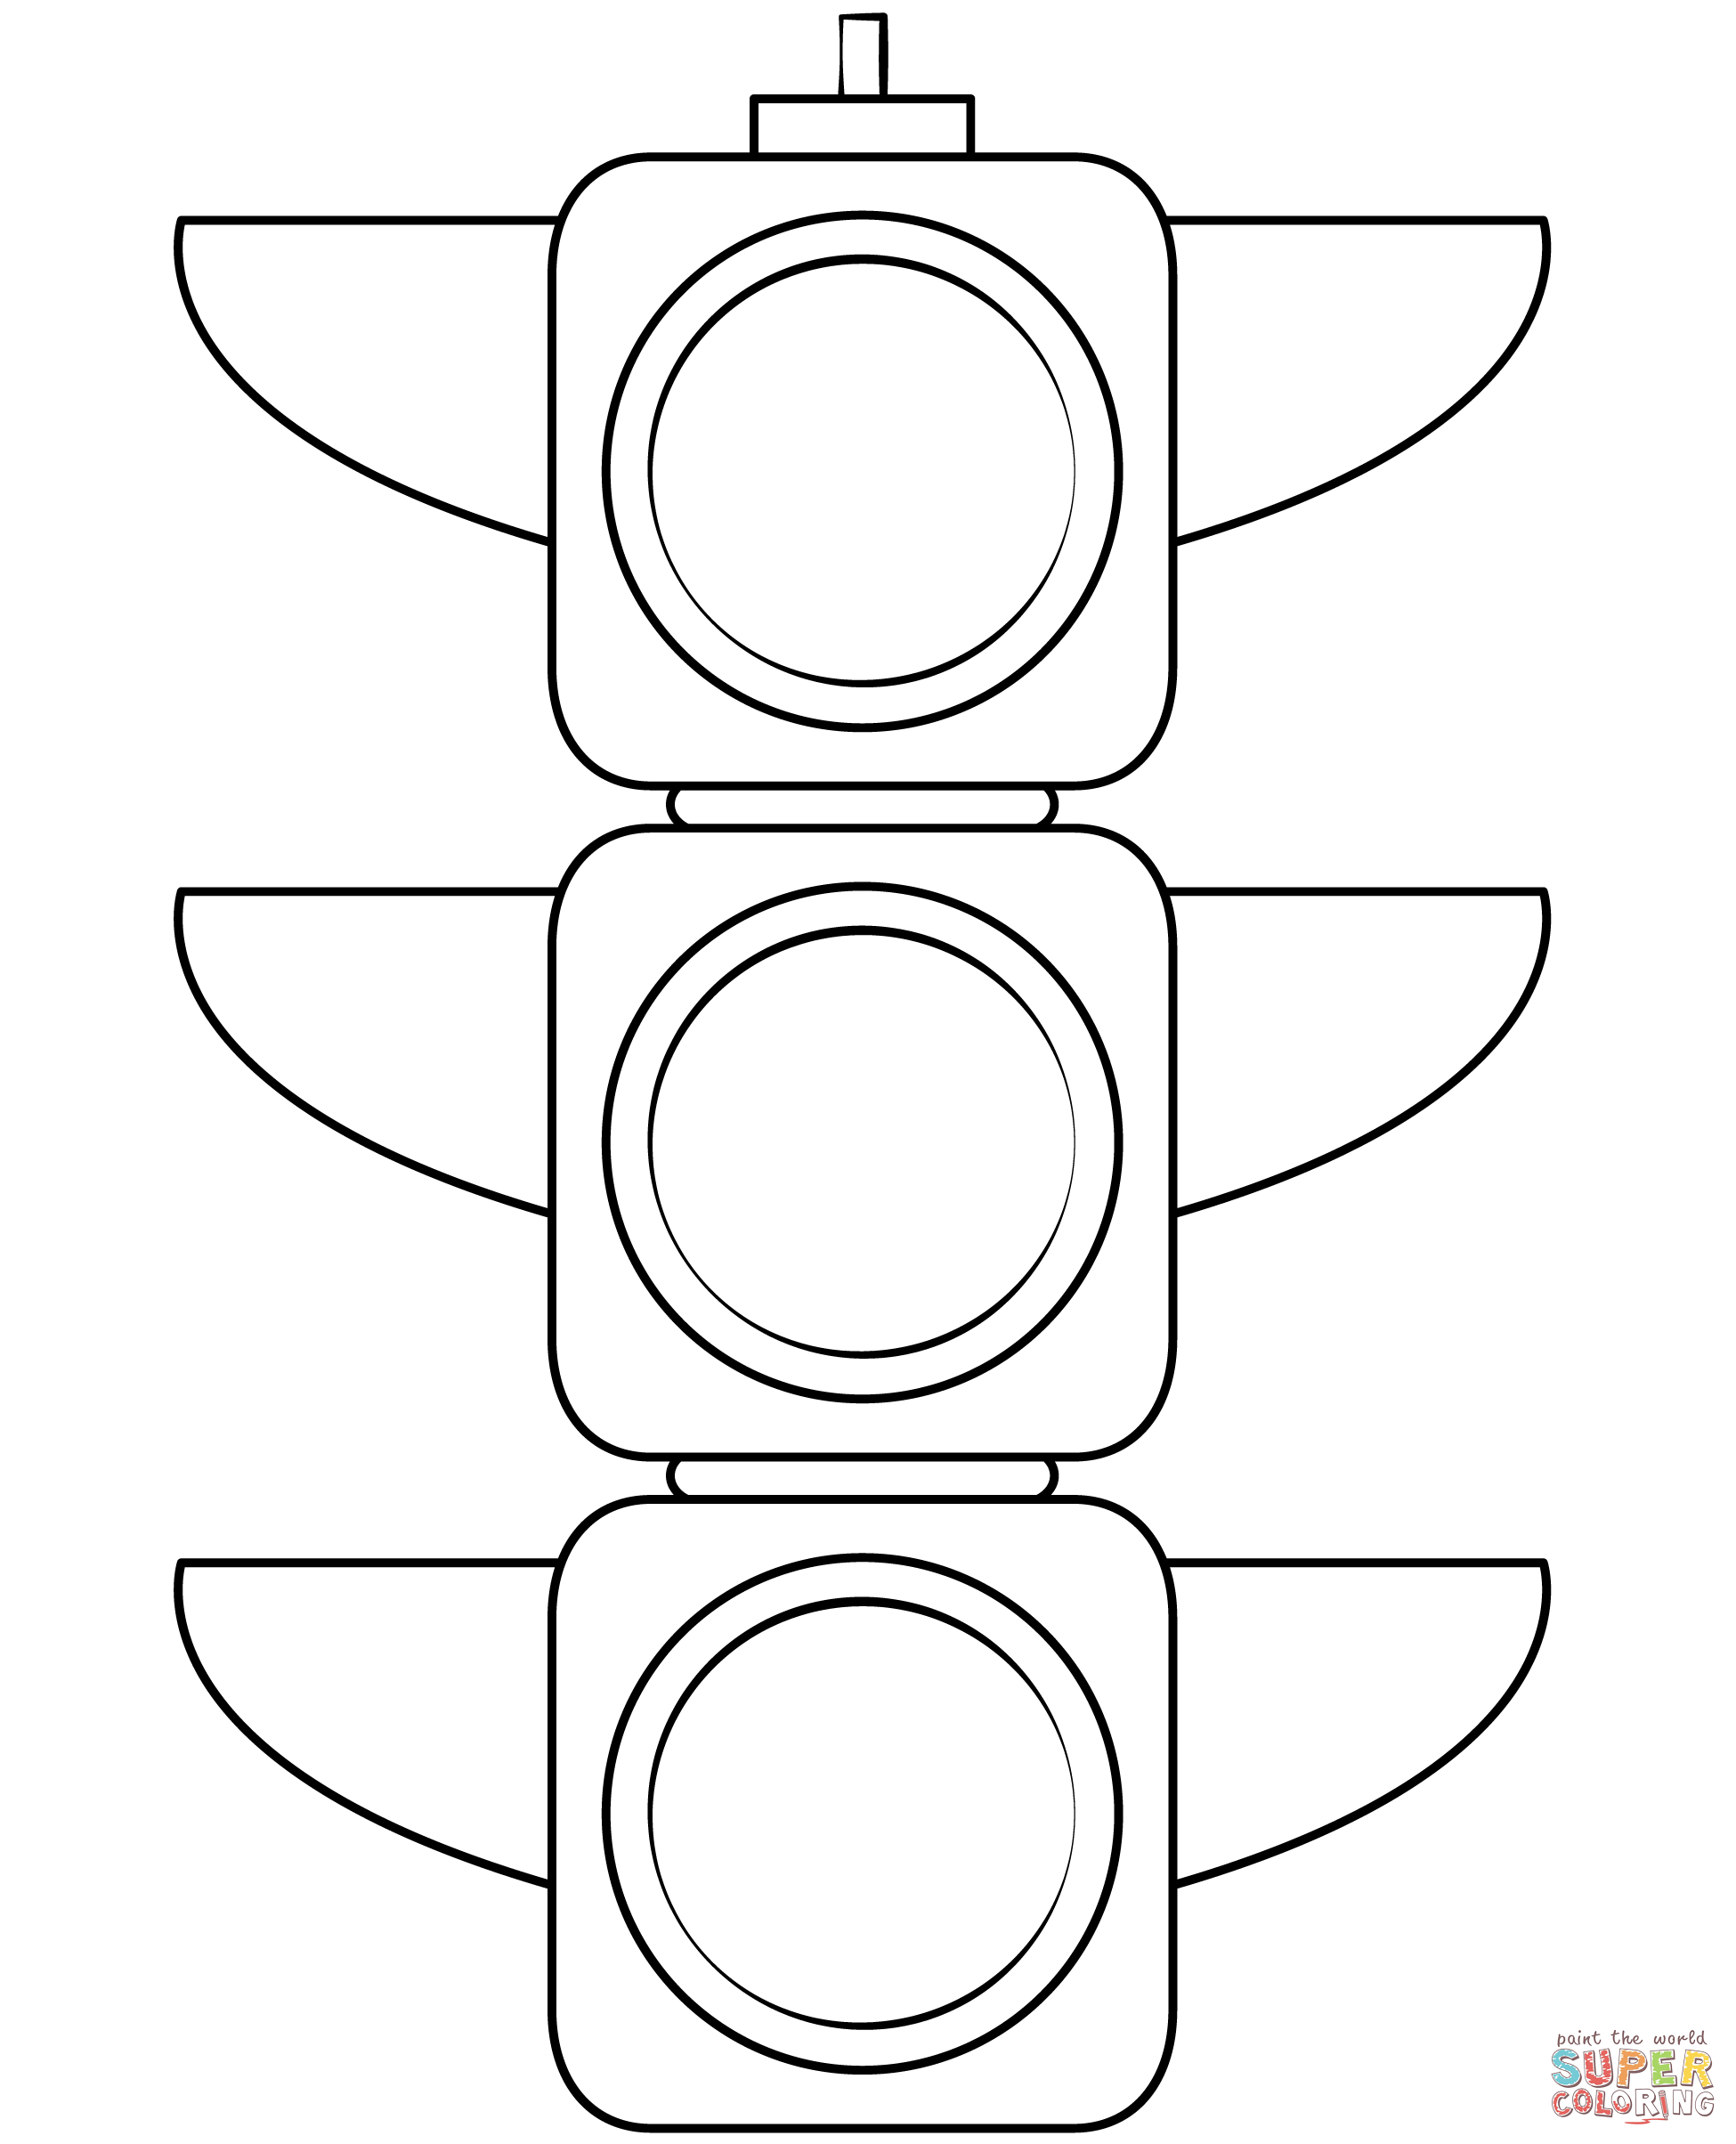 Traffic Light coloring page | Free Printable Coloring Pages